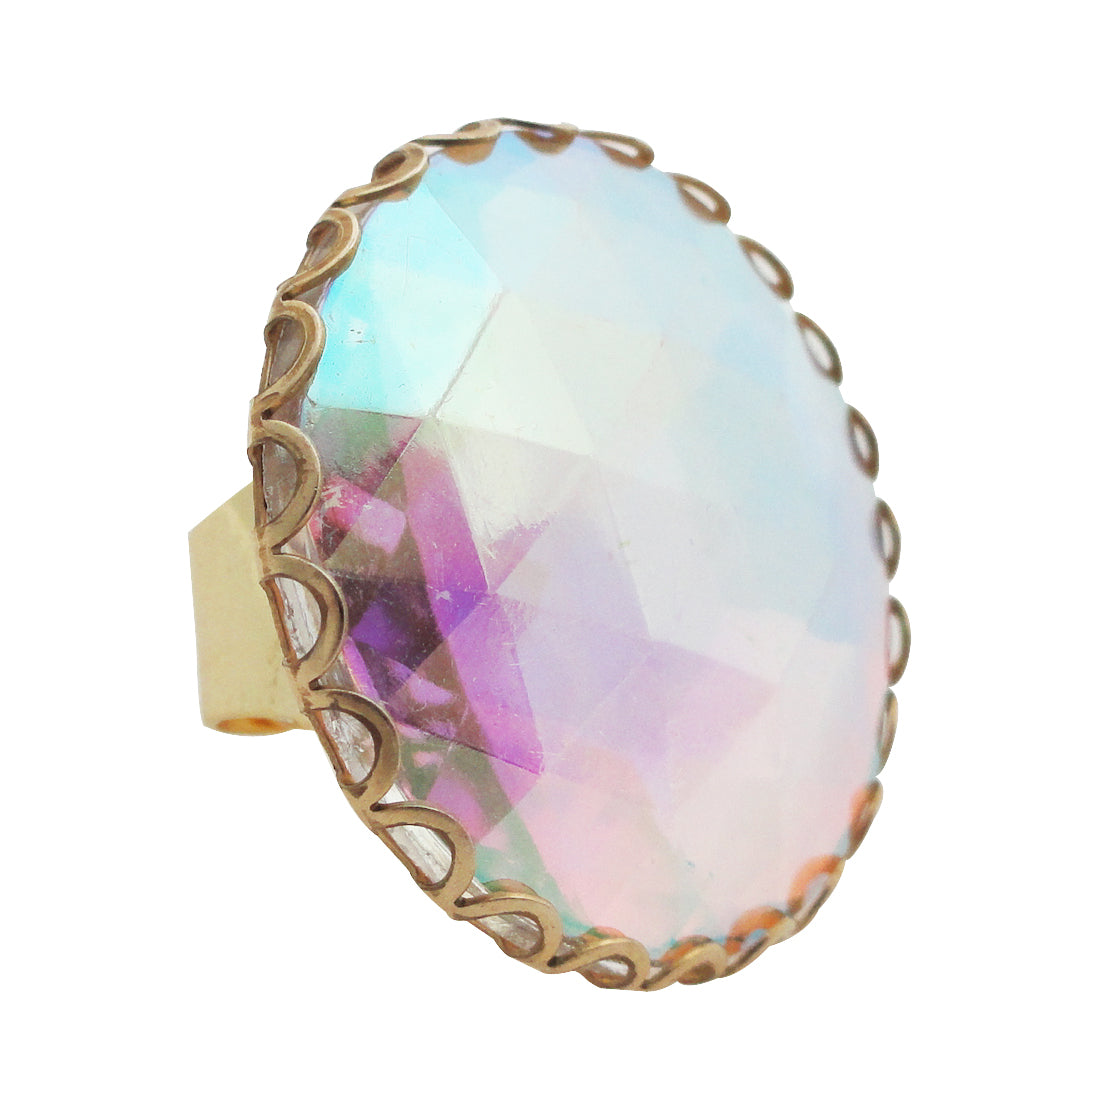 Iridescent faceted glass ring by Jenny Dayco